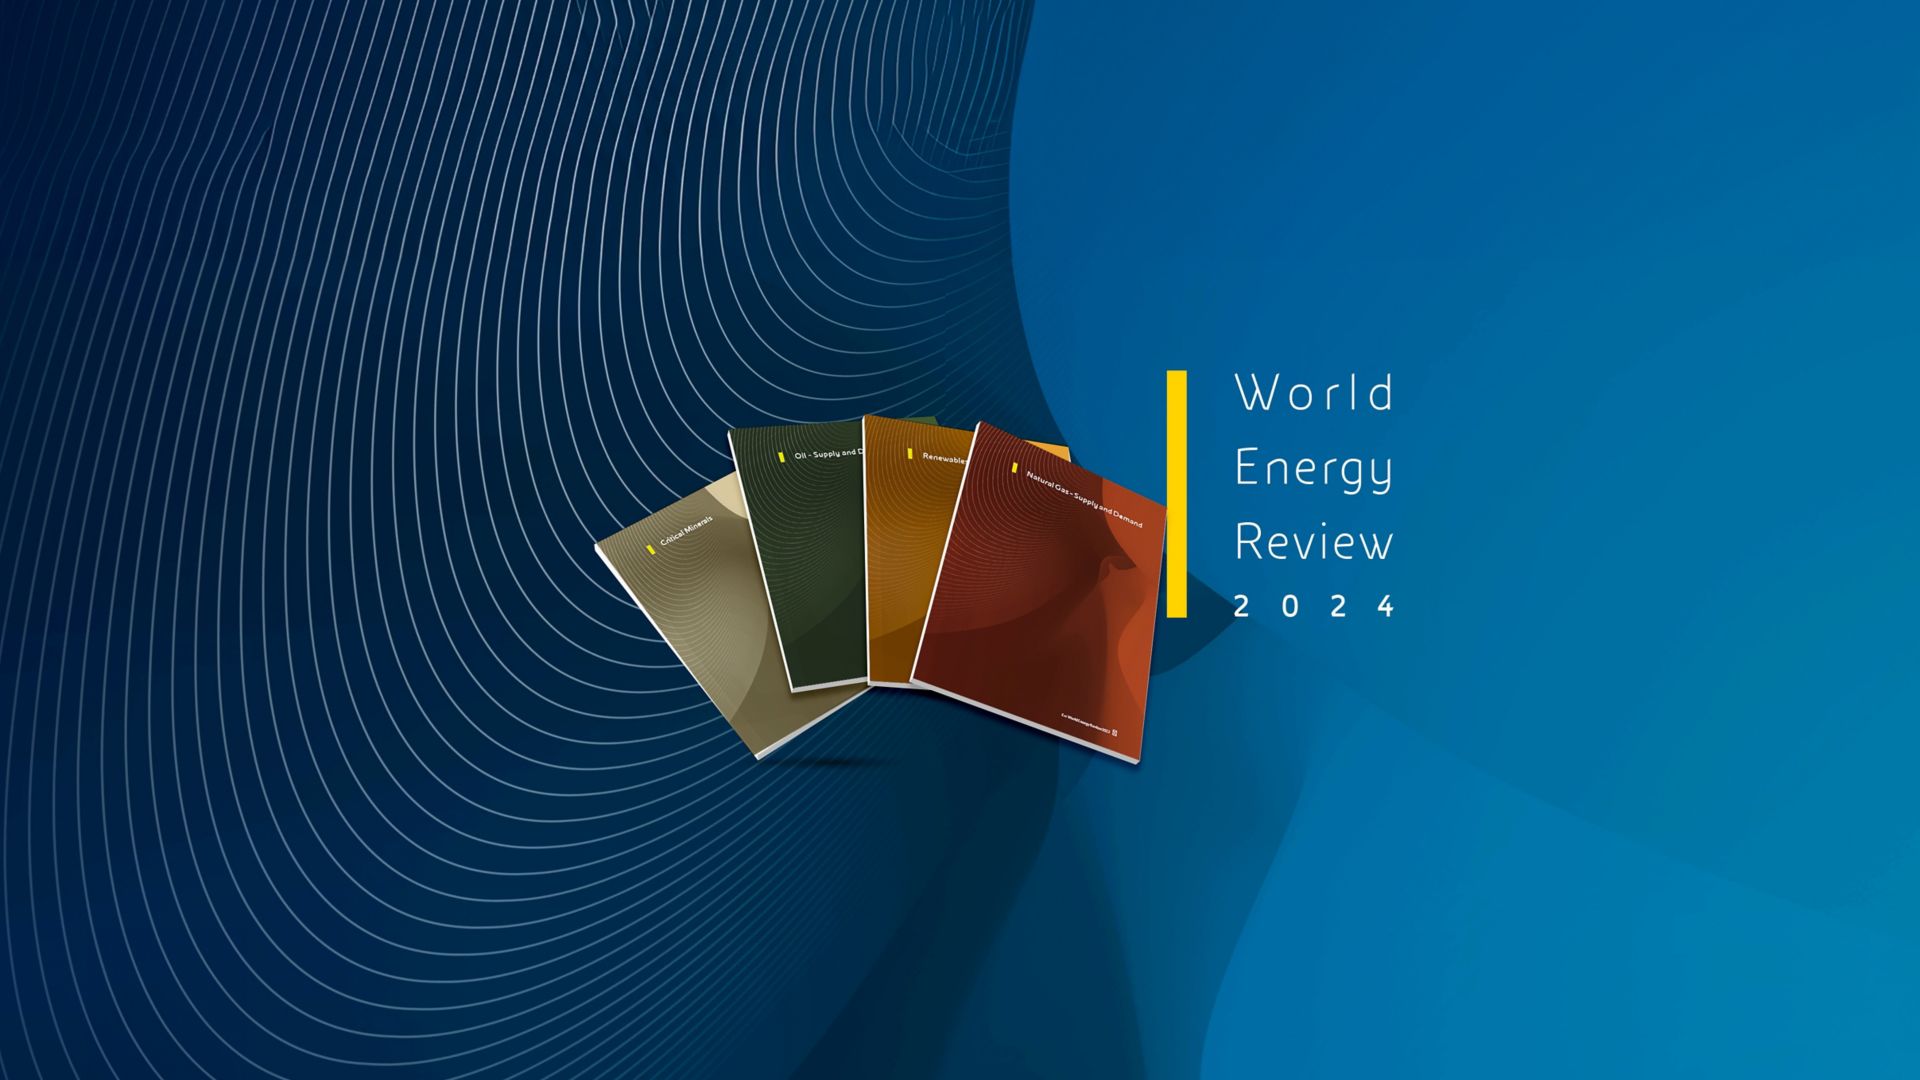 World Energy Review 2024